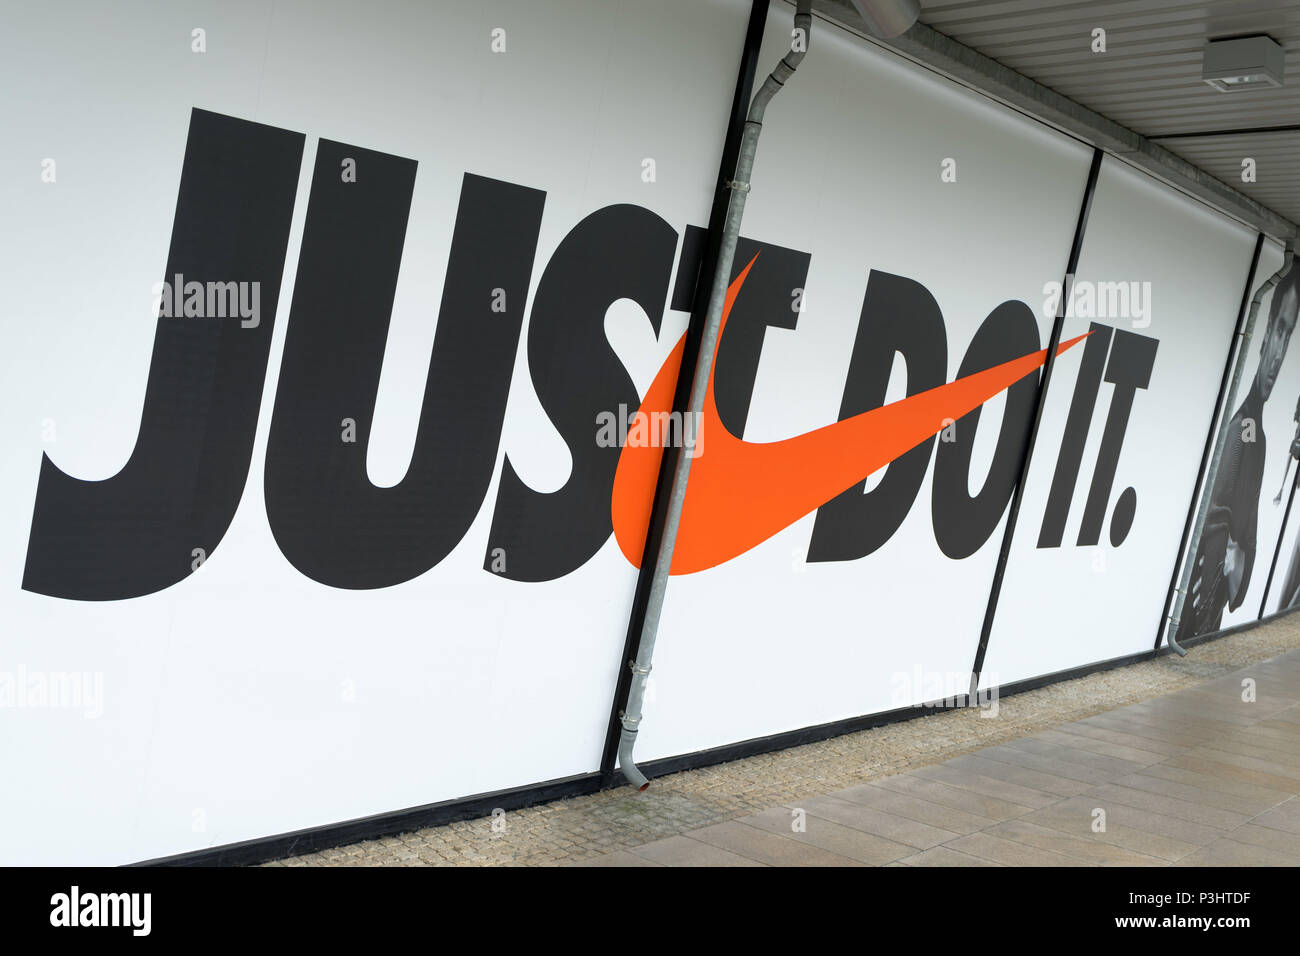 The Nike logo and Nike motto "just do it" on the window display in an  outlet in Wolfsburg, Germany, June 15, 2018 Stock Photo - Alamy